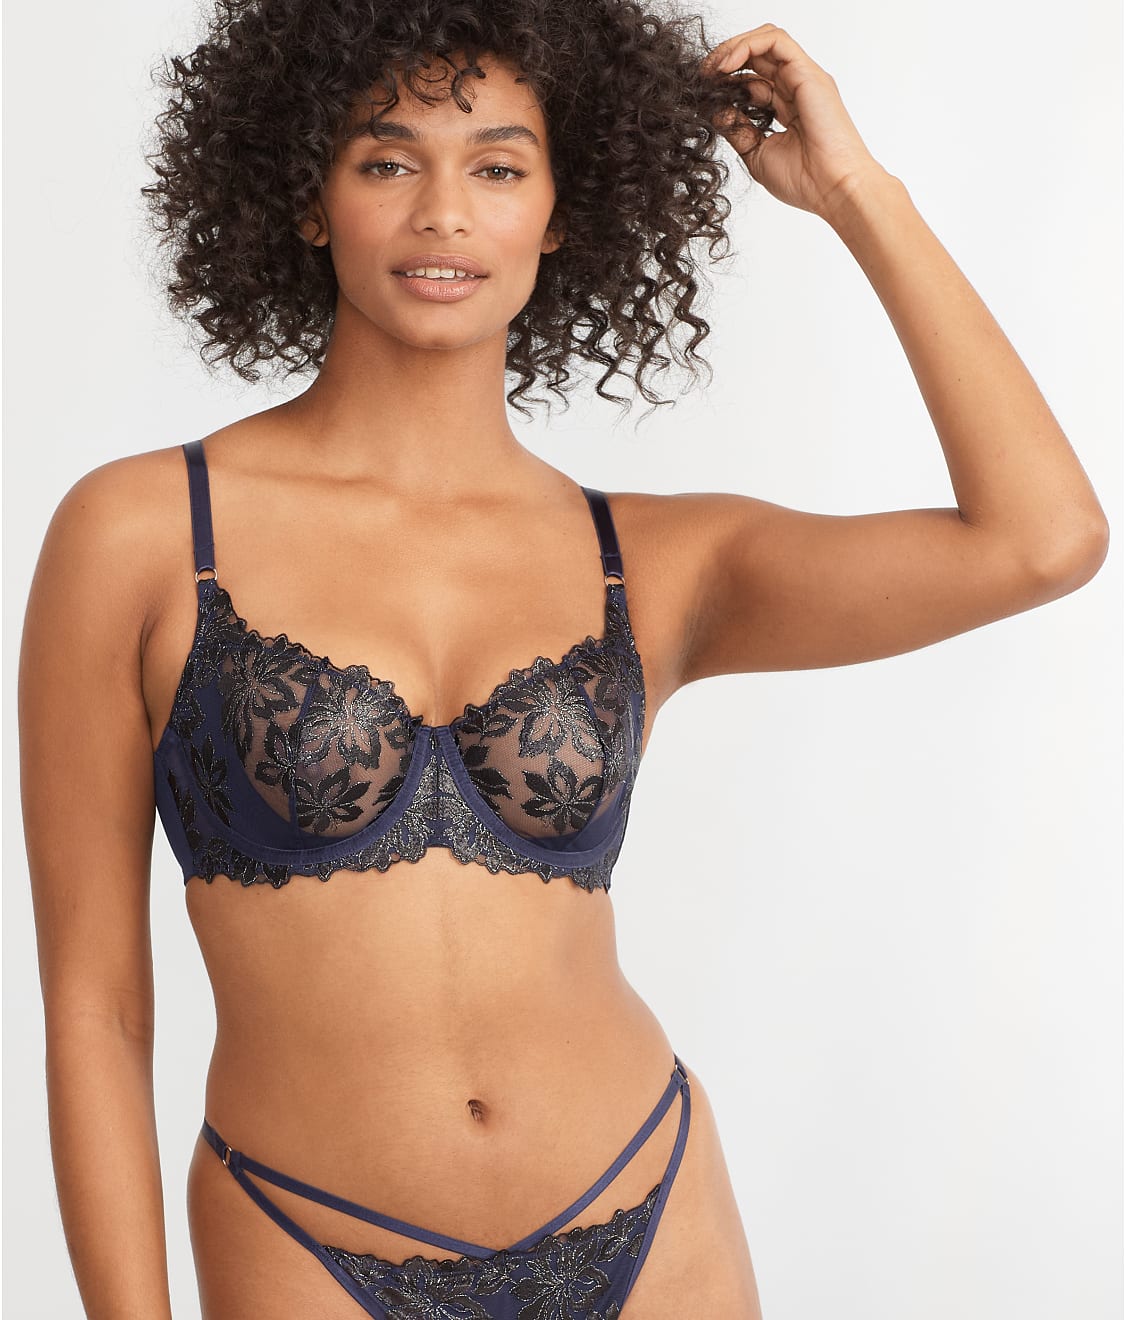 Gorgeous allover lace for the most sumptuous bras and lingerie